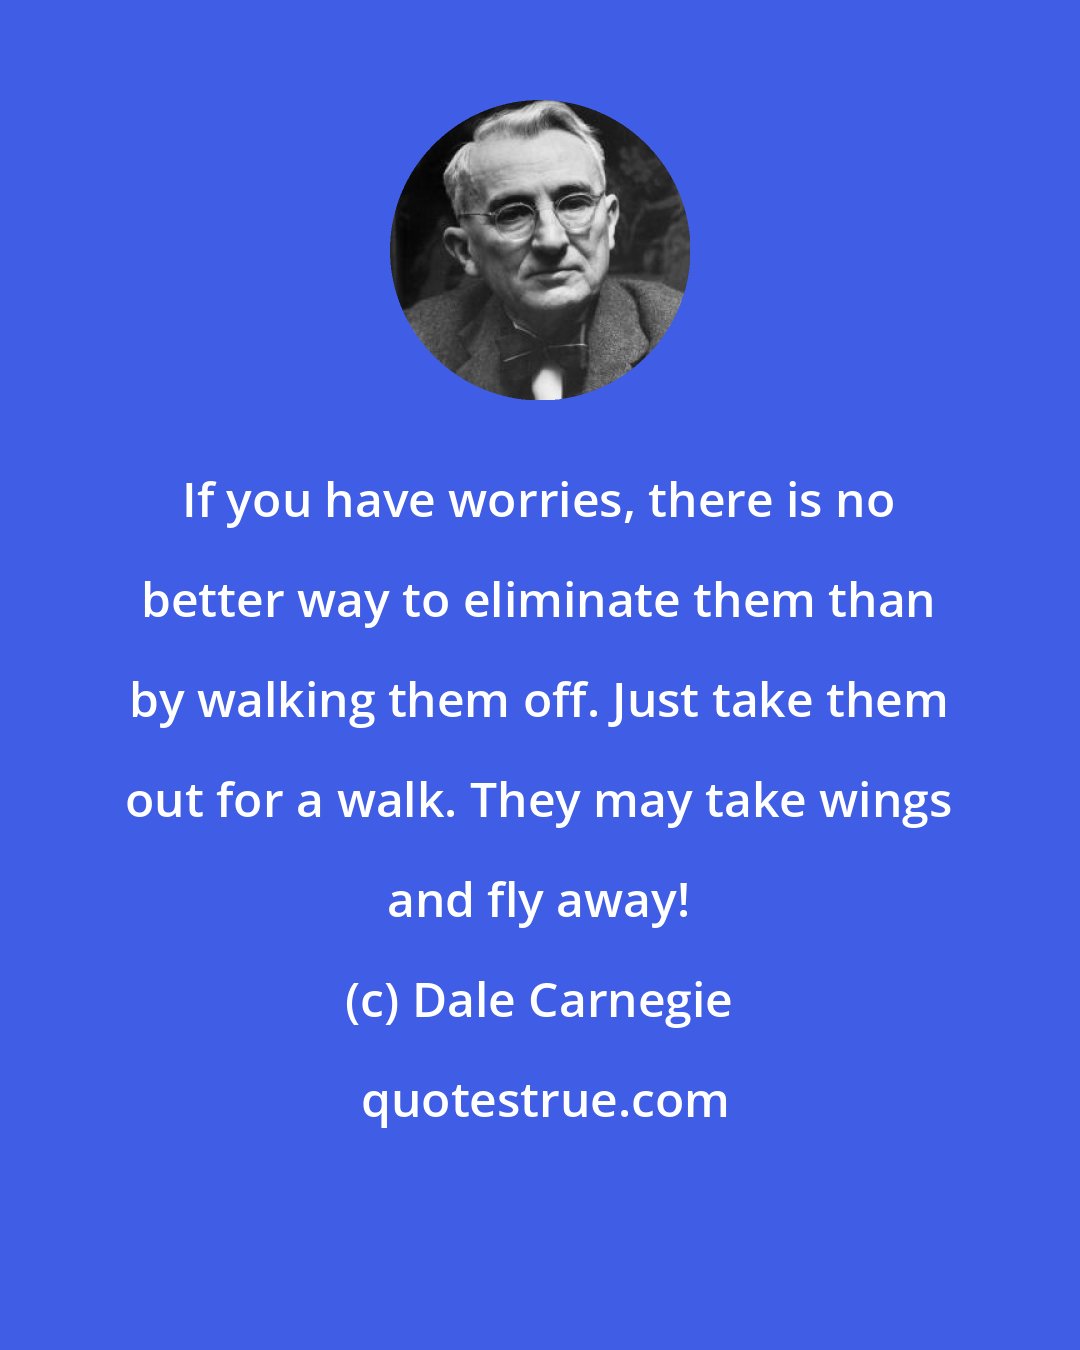 Dale Carnegie: If you have worries, there is no better way to eliminate them than by walking them off. Just take them out for a walk. They may take wings and fly away!